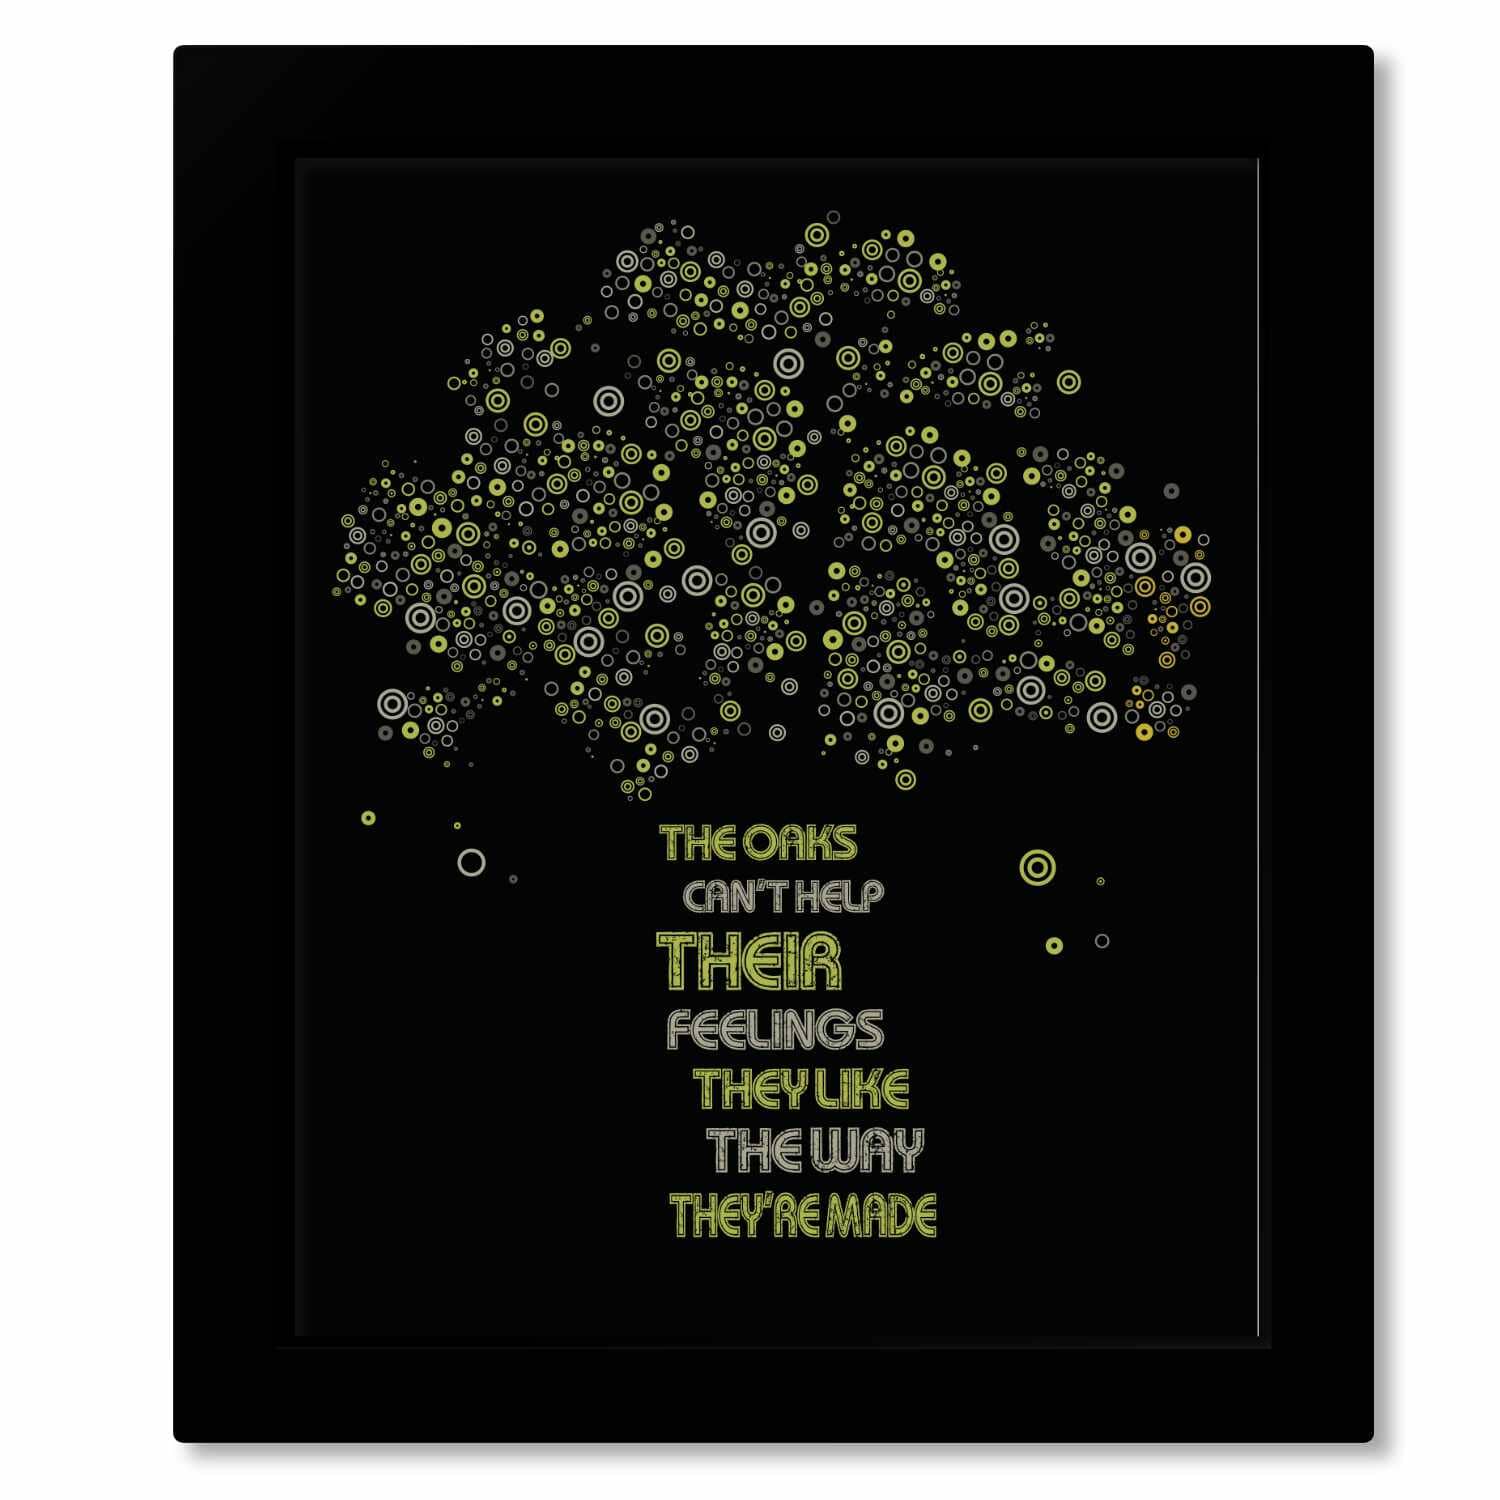 The Trees by Rush - Lyric Inspired Song Art Rock Music Print Song Lyrics Art Song Lyrics Art 8x10 Framed (without mat) Print 